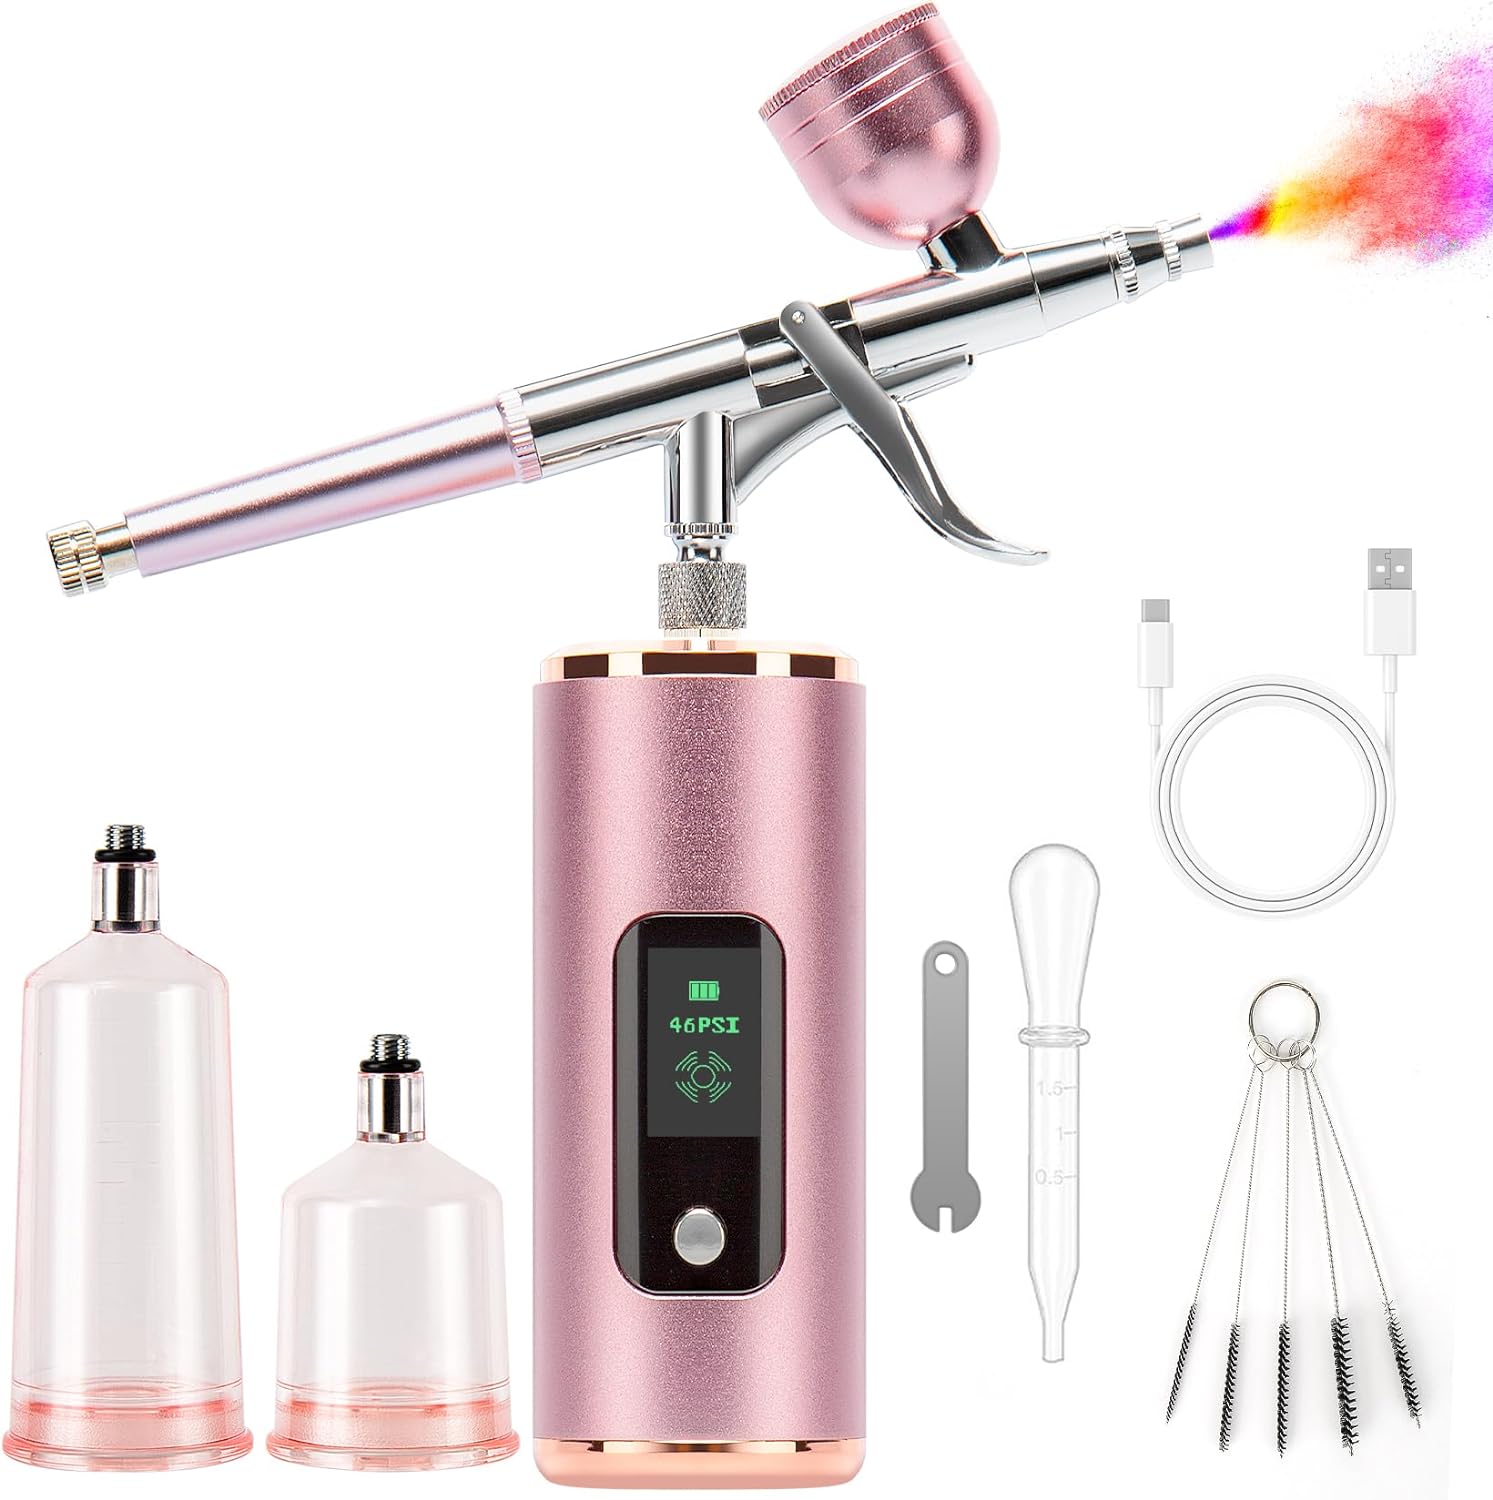  Airbrush Kit with Compressor, Miaphie Air Brush